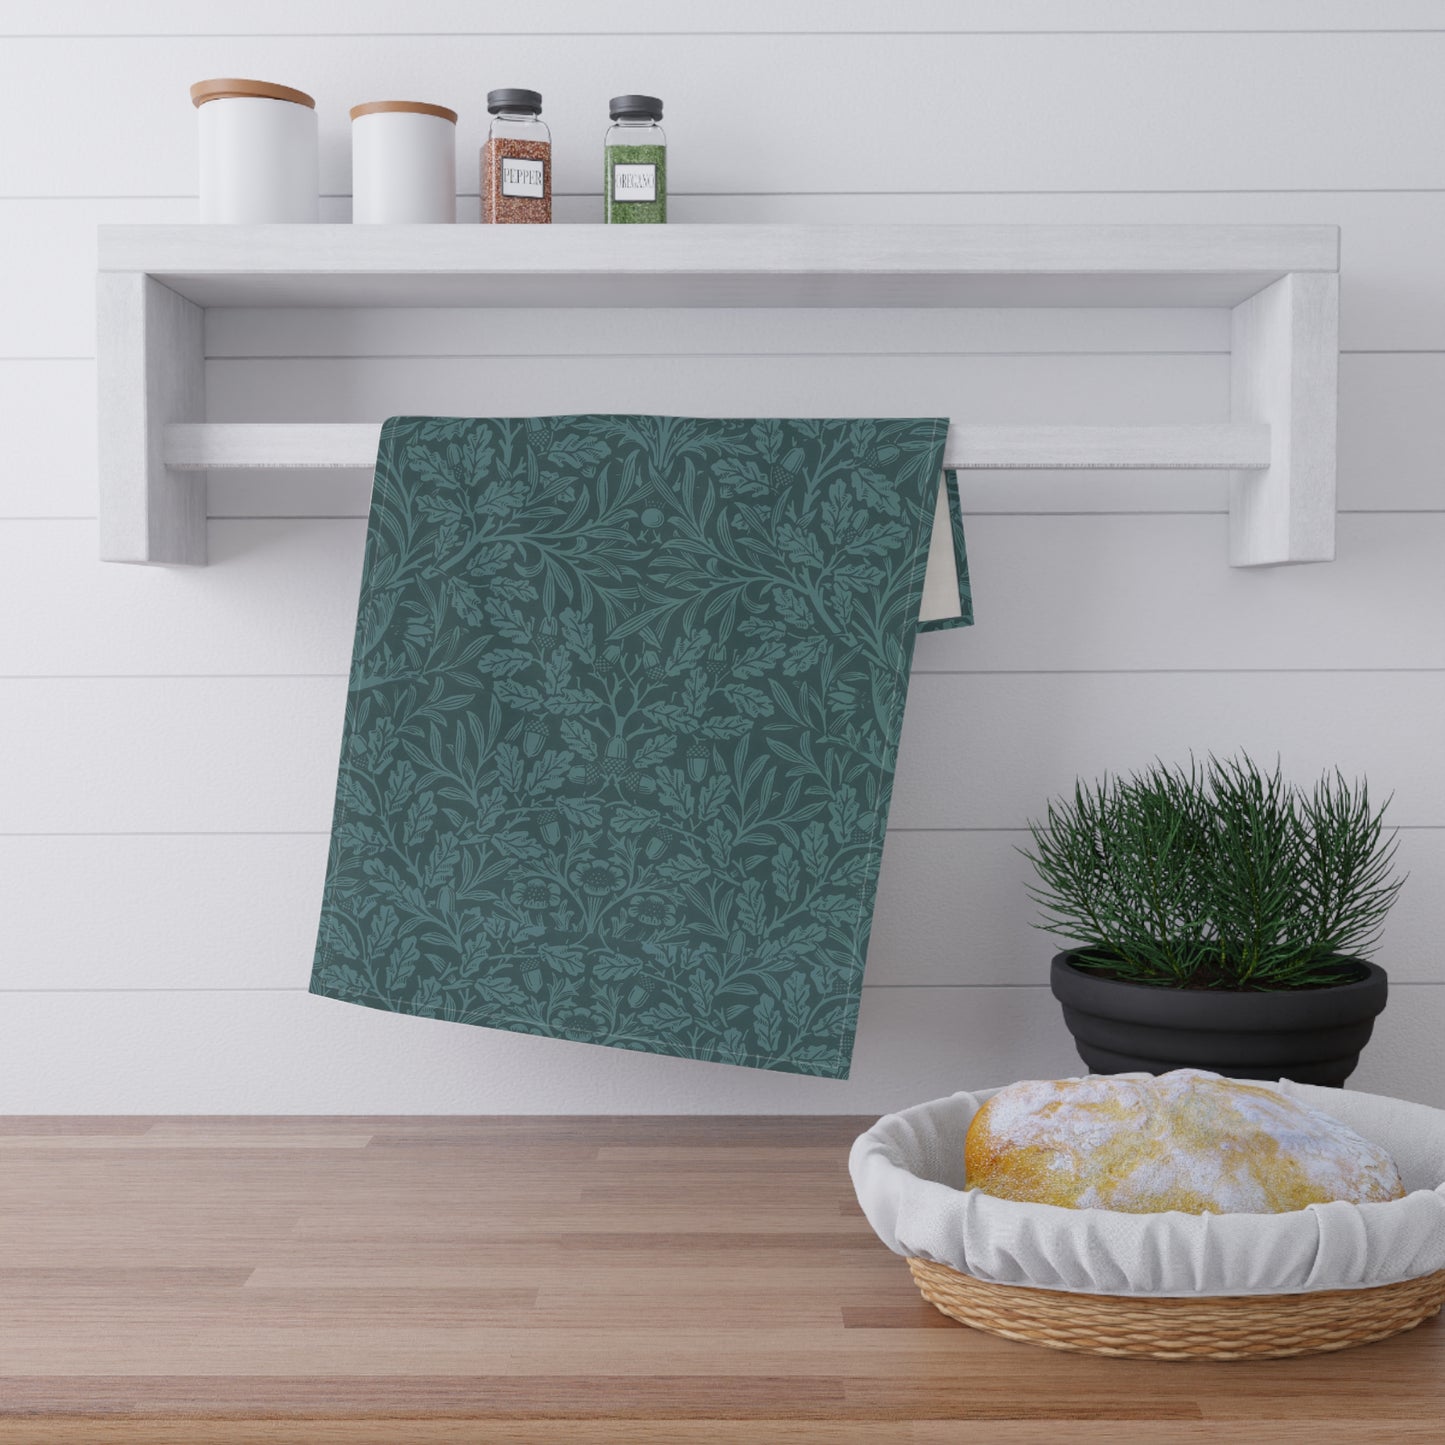 william-morris-co-kitchen-tea-towel-acorn-and-oak-leaves-collection-teal-13